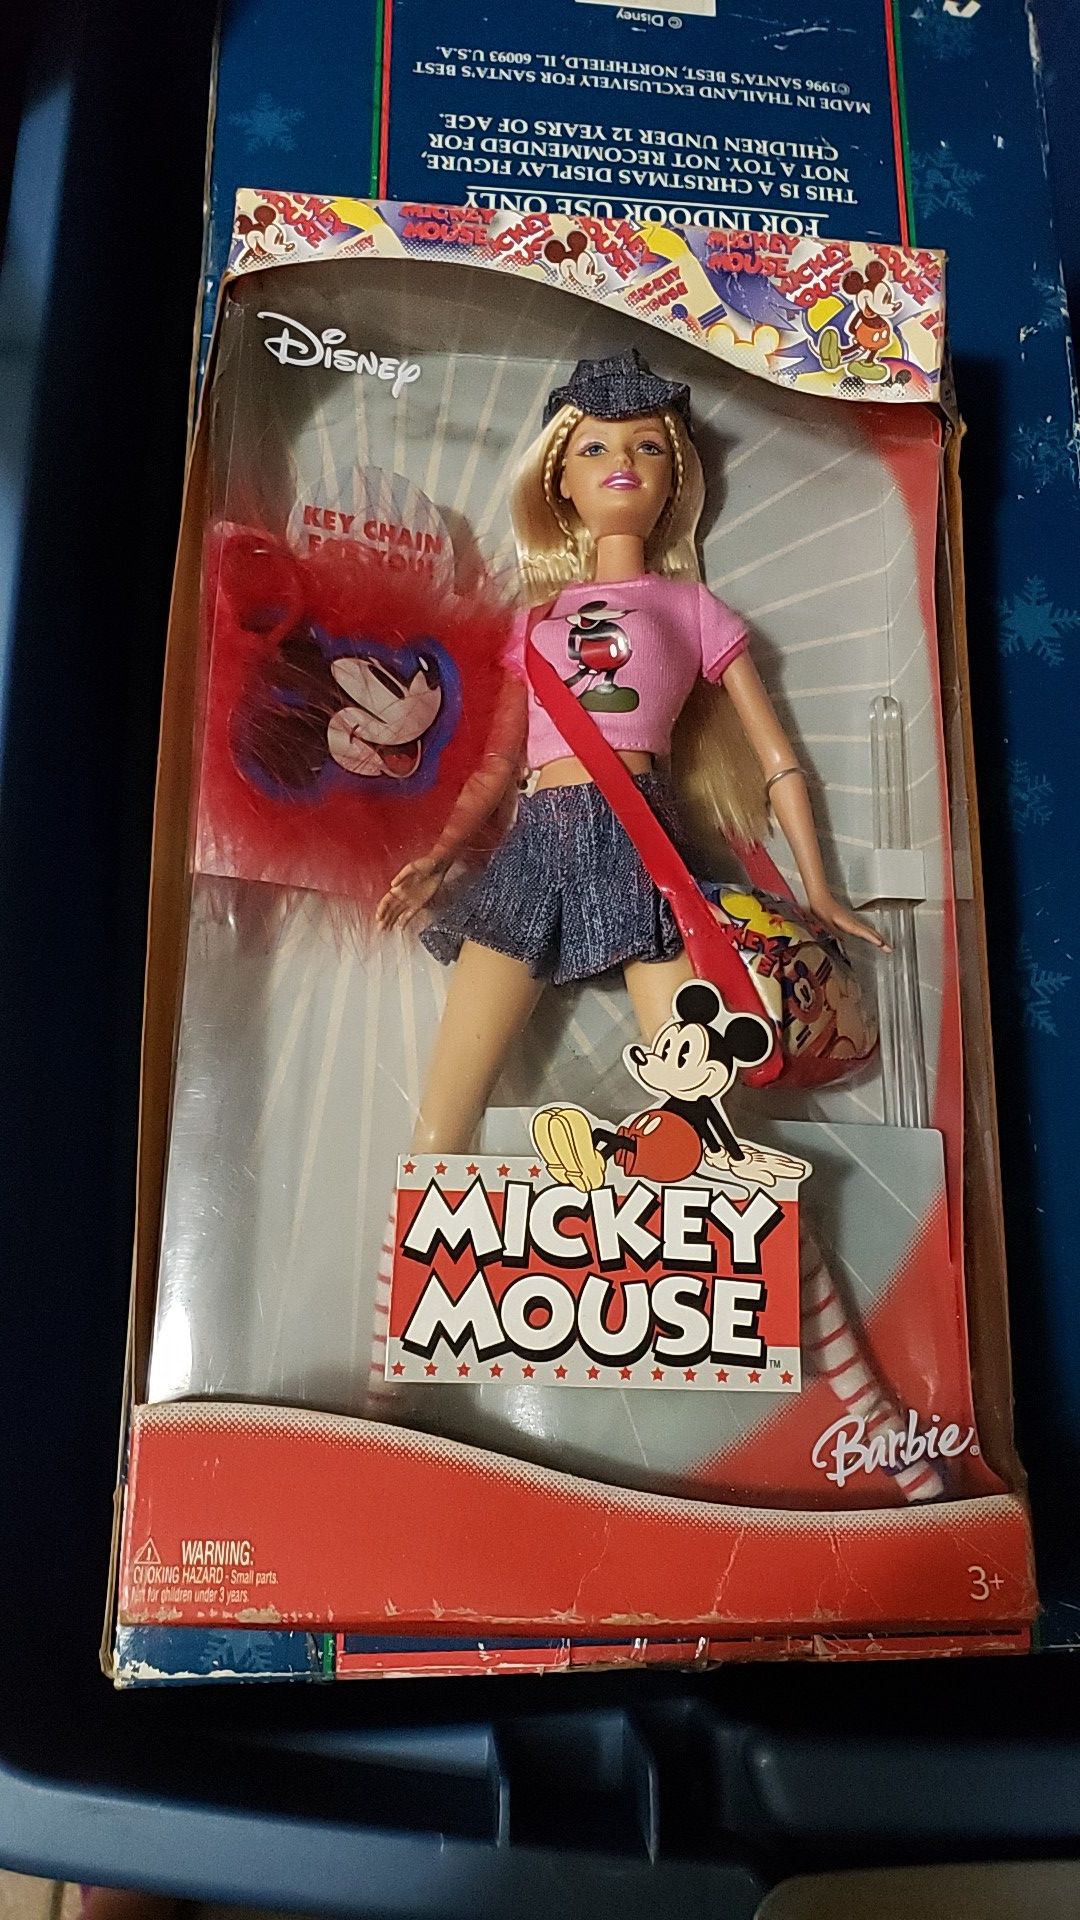 Michie mouse addition barbie doll